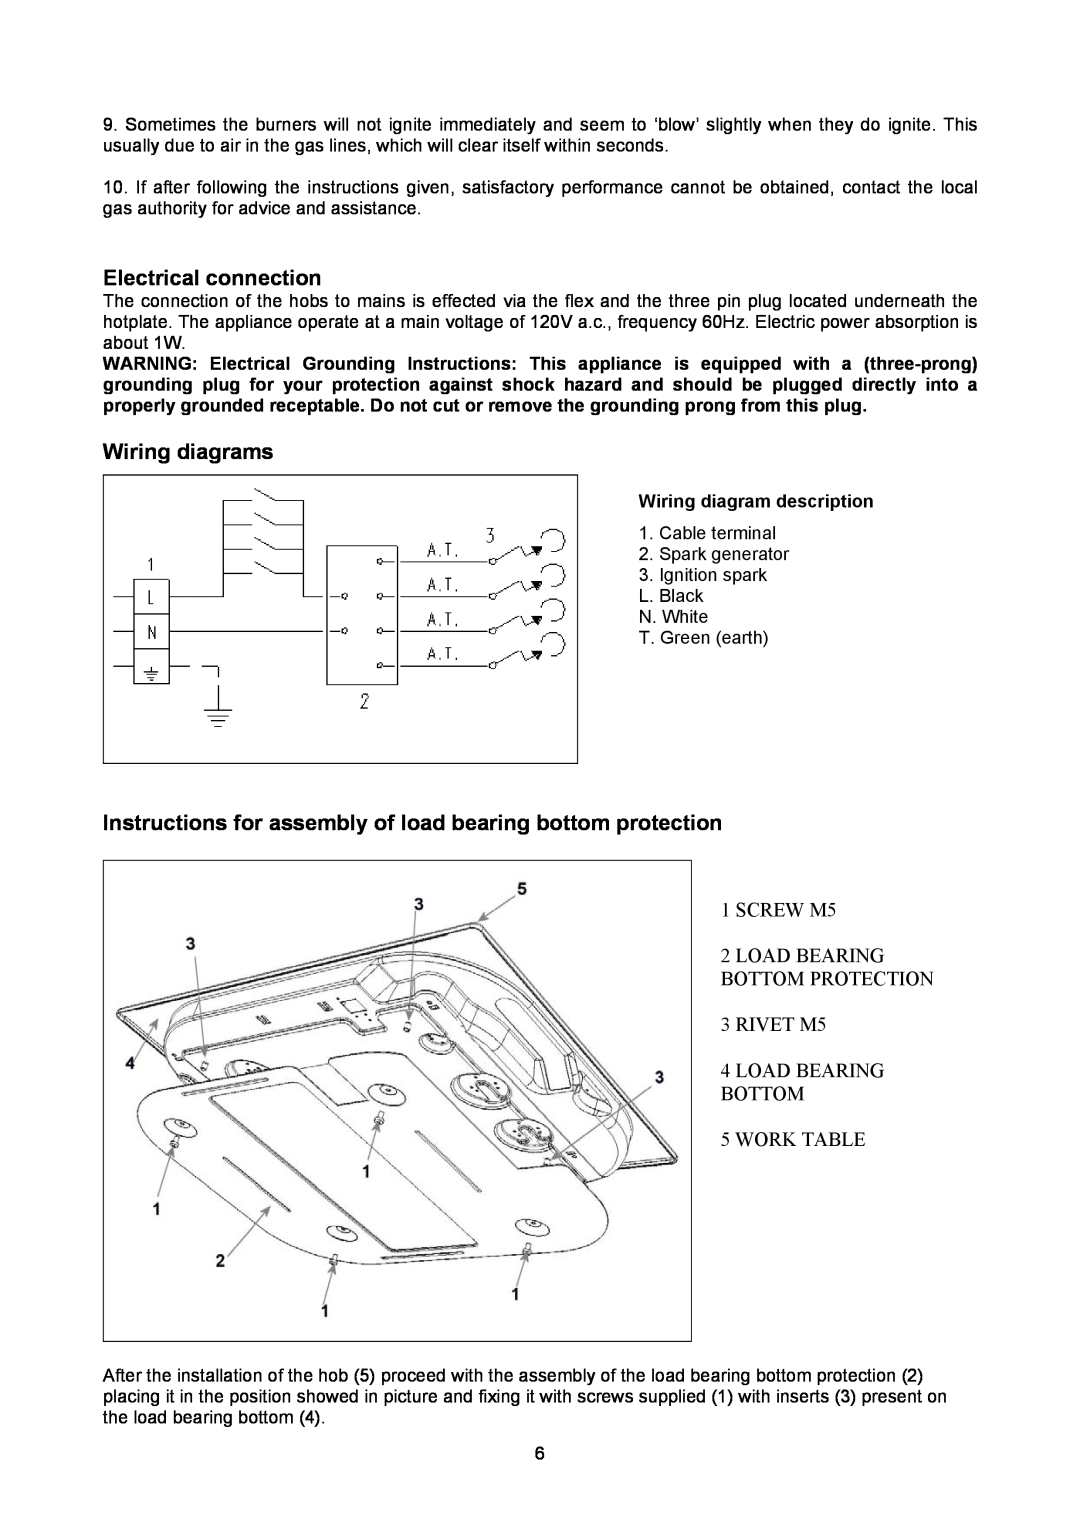 Bertazzoni P24400X Electrical connection, Wiring diagrams, Instructions for assembly of load bearing bottom protection 